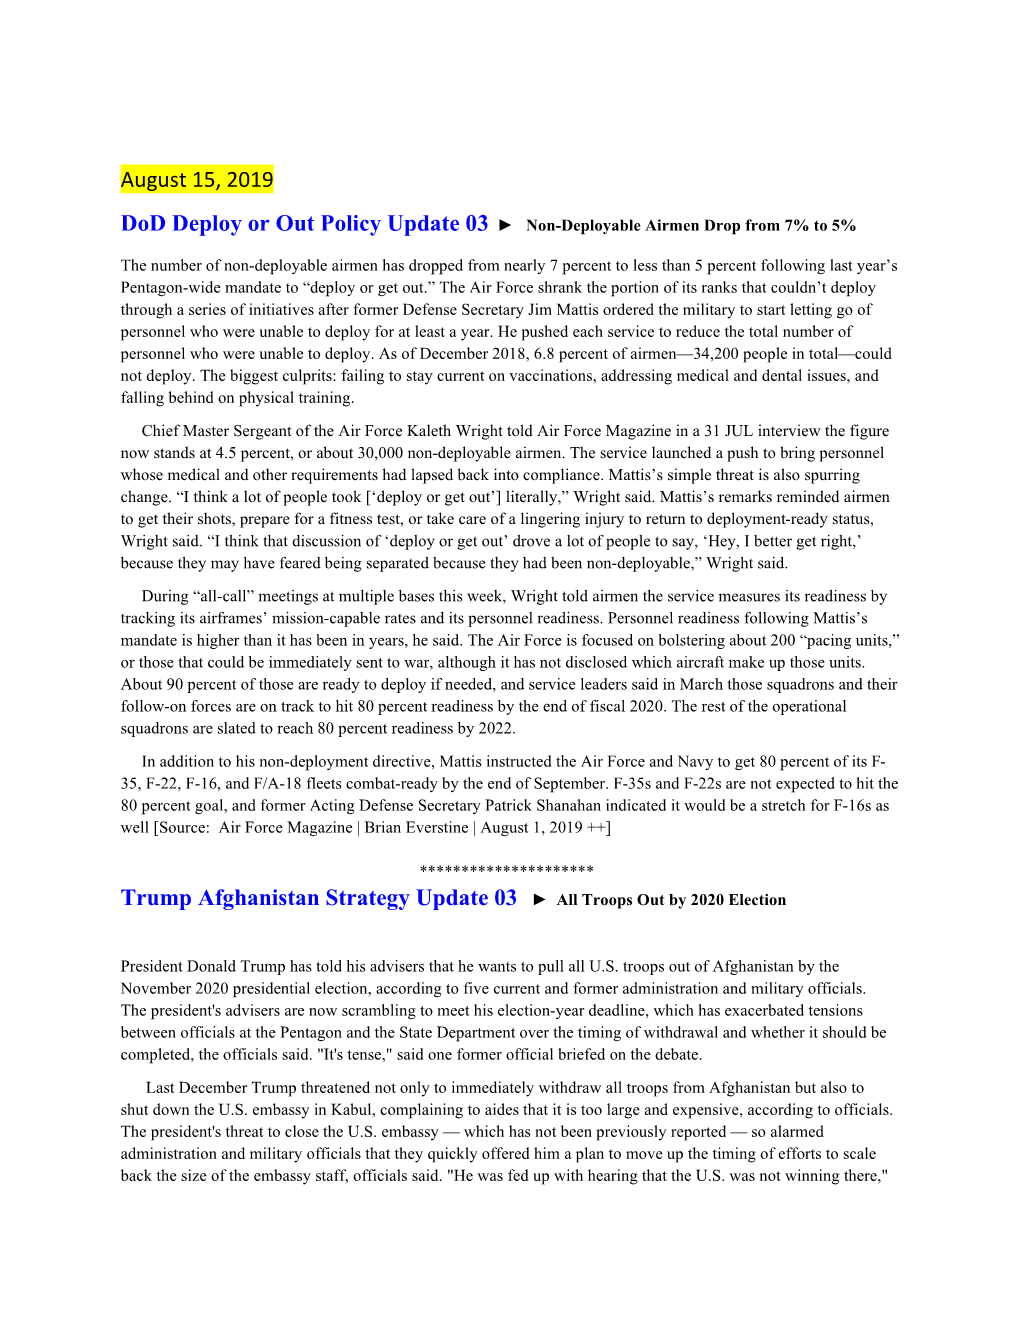 August 15, 2019 Trump Afghanistan Strategy Update 03 All Troops Out